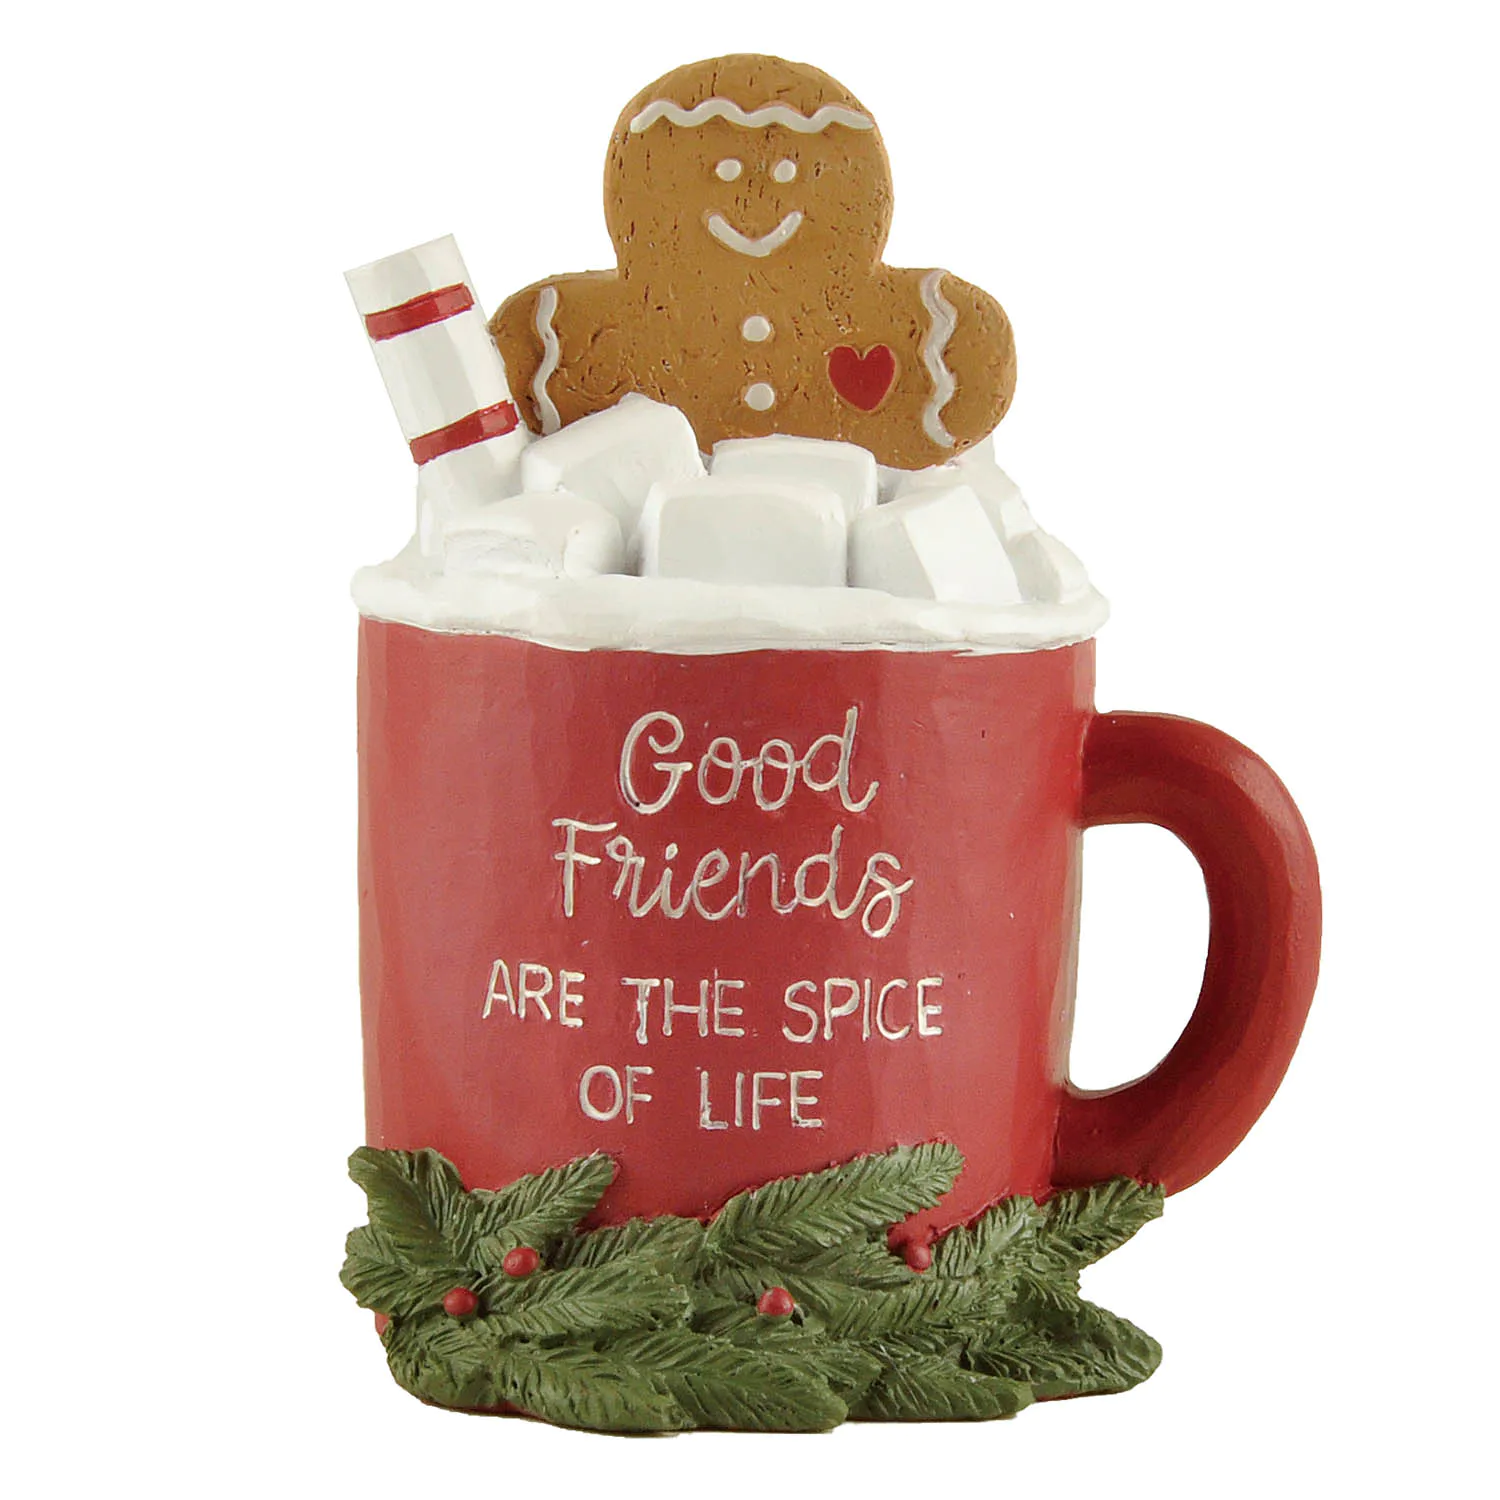 New Design Resin Christmas Crafts Cute Gingerbread Cookie in Red Mug w Christmas Greens for Home Decor 238-13742